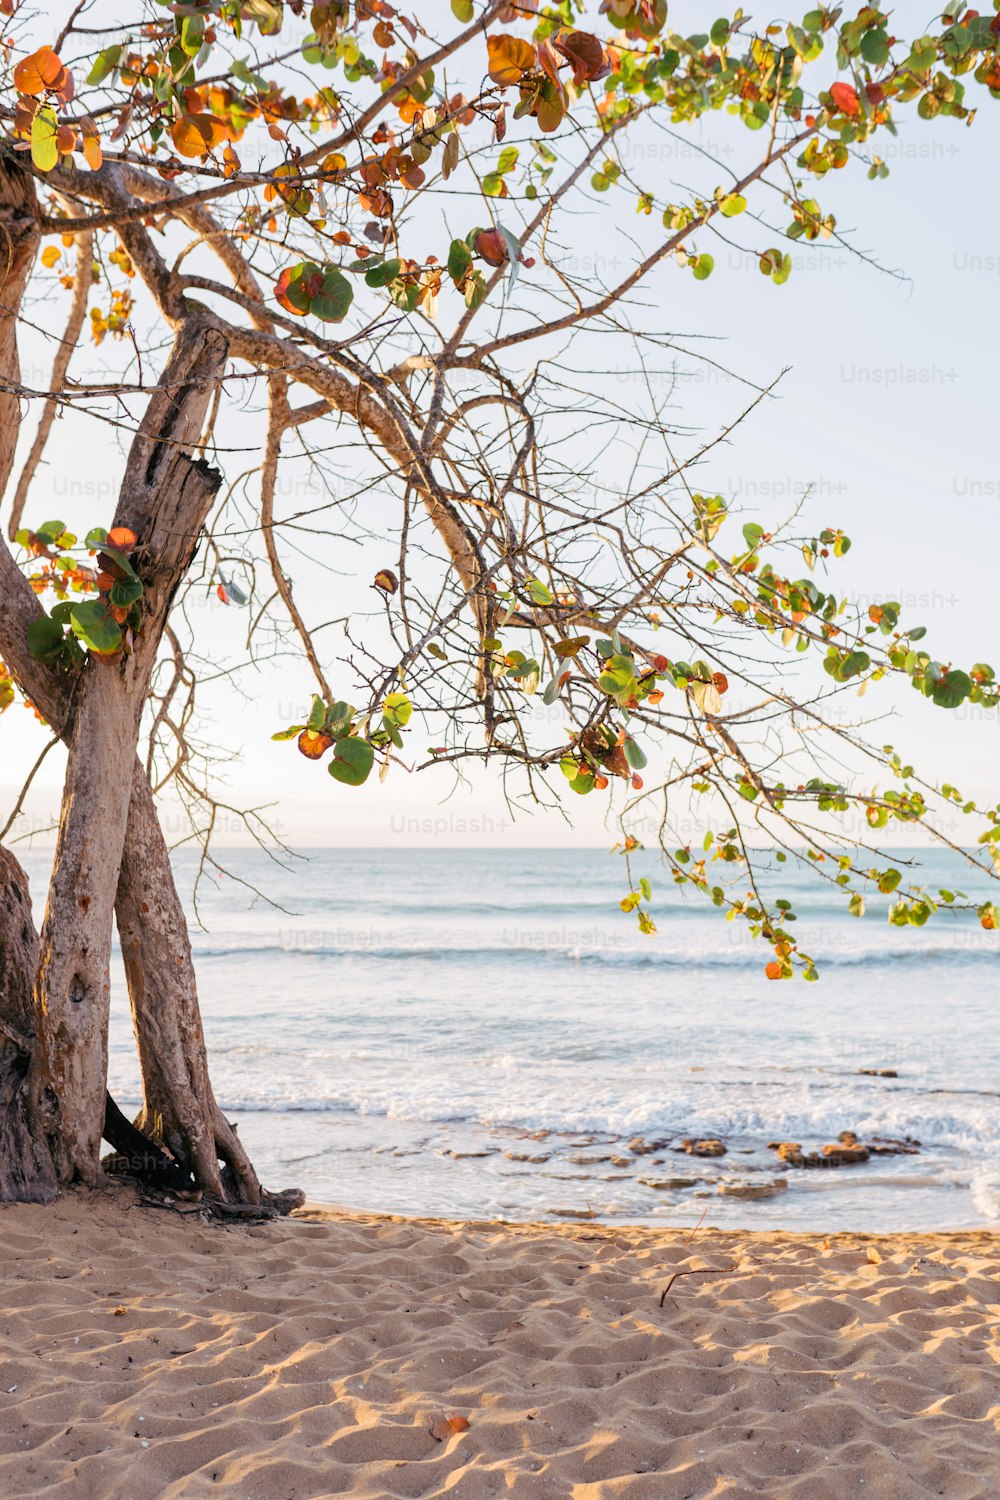 a tree on a beach with a body of water in the background